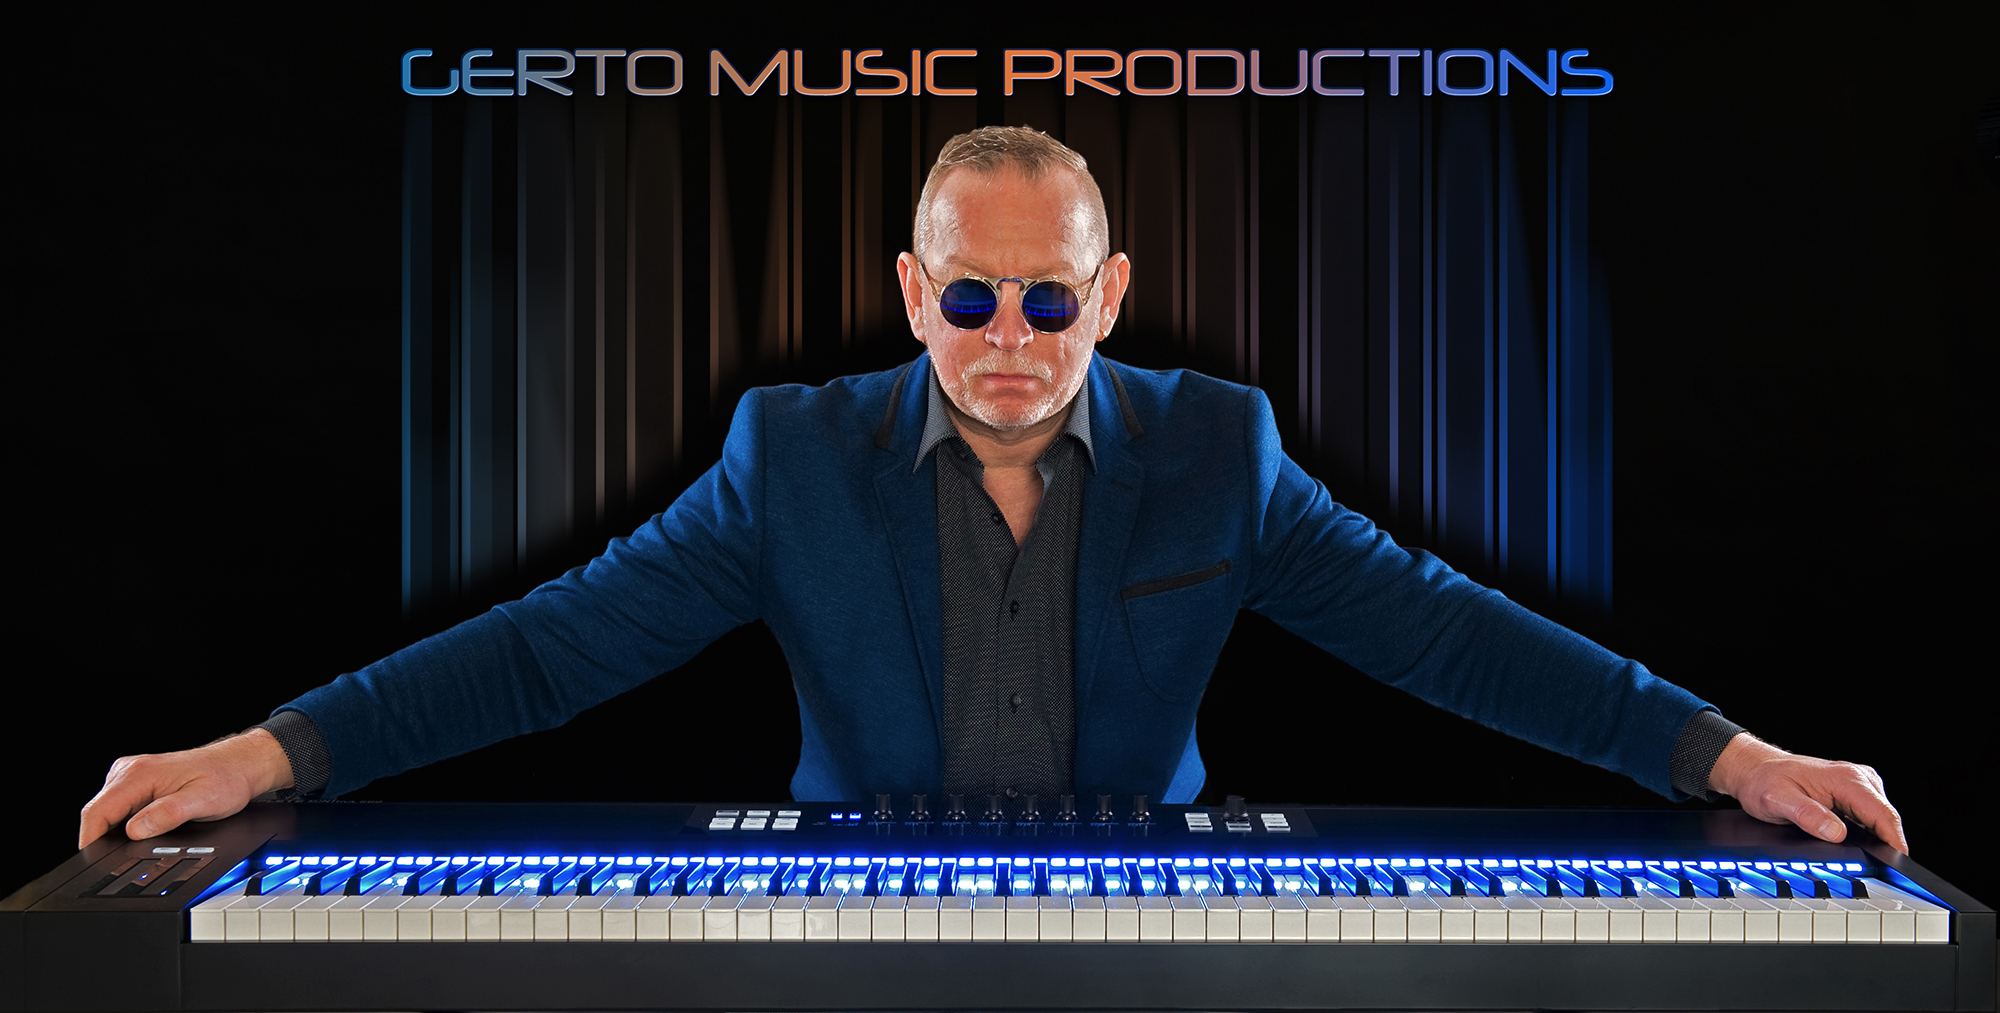 Gerto Music Productions